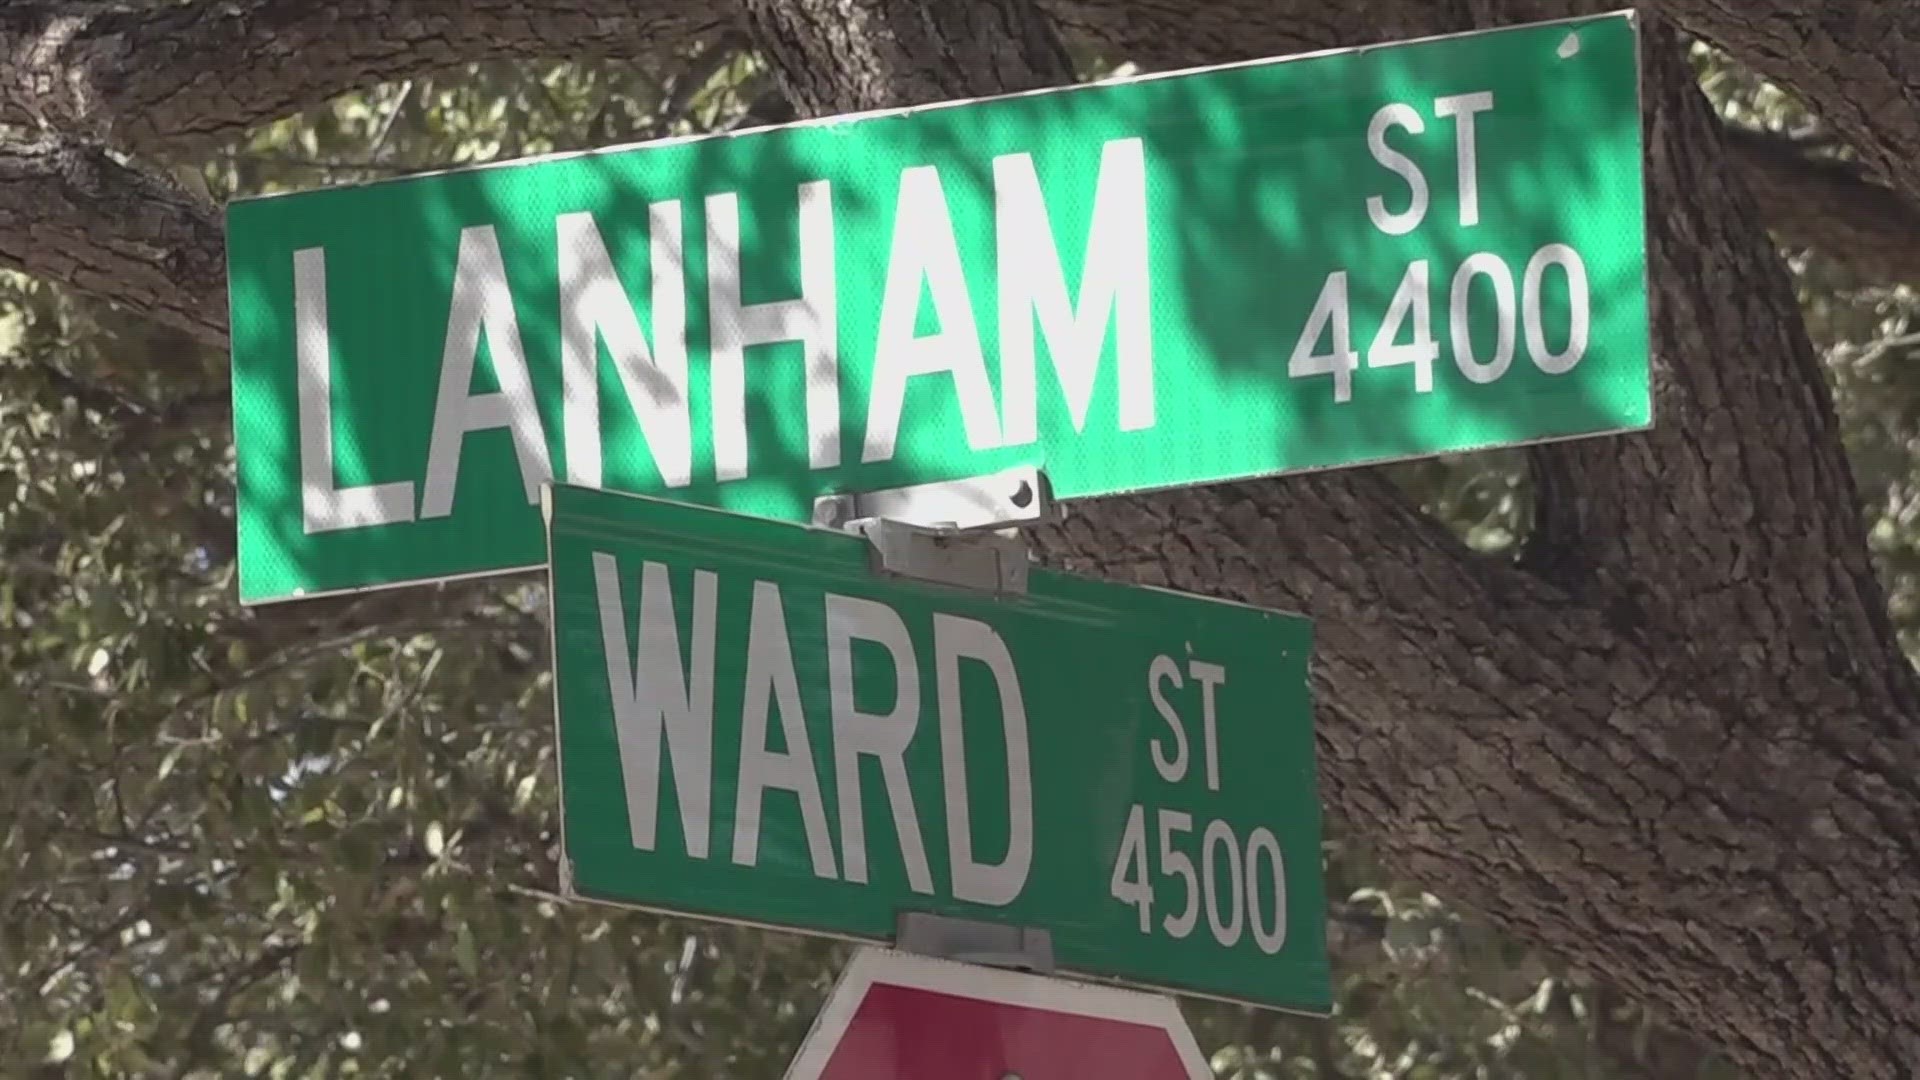 The City of Midland tells NewsWest 9 that an alleged assault with a weapon occurred in the 4400 block of Lanham St. and a subject was taken into custody.